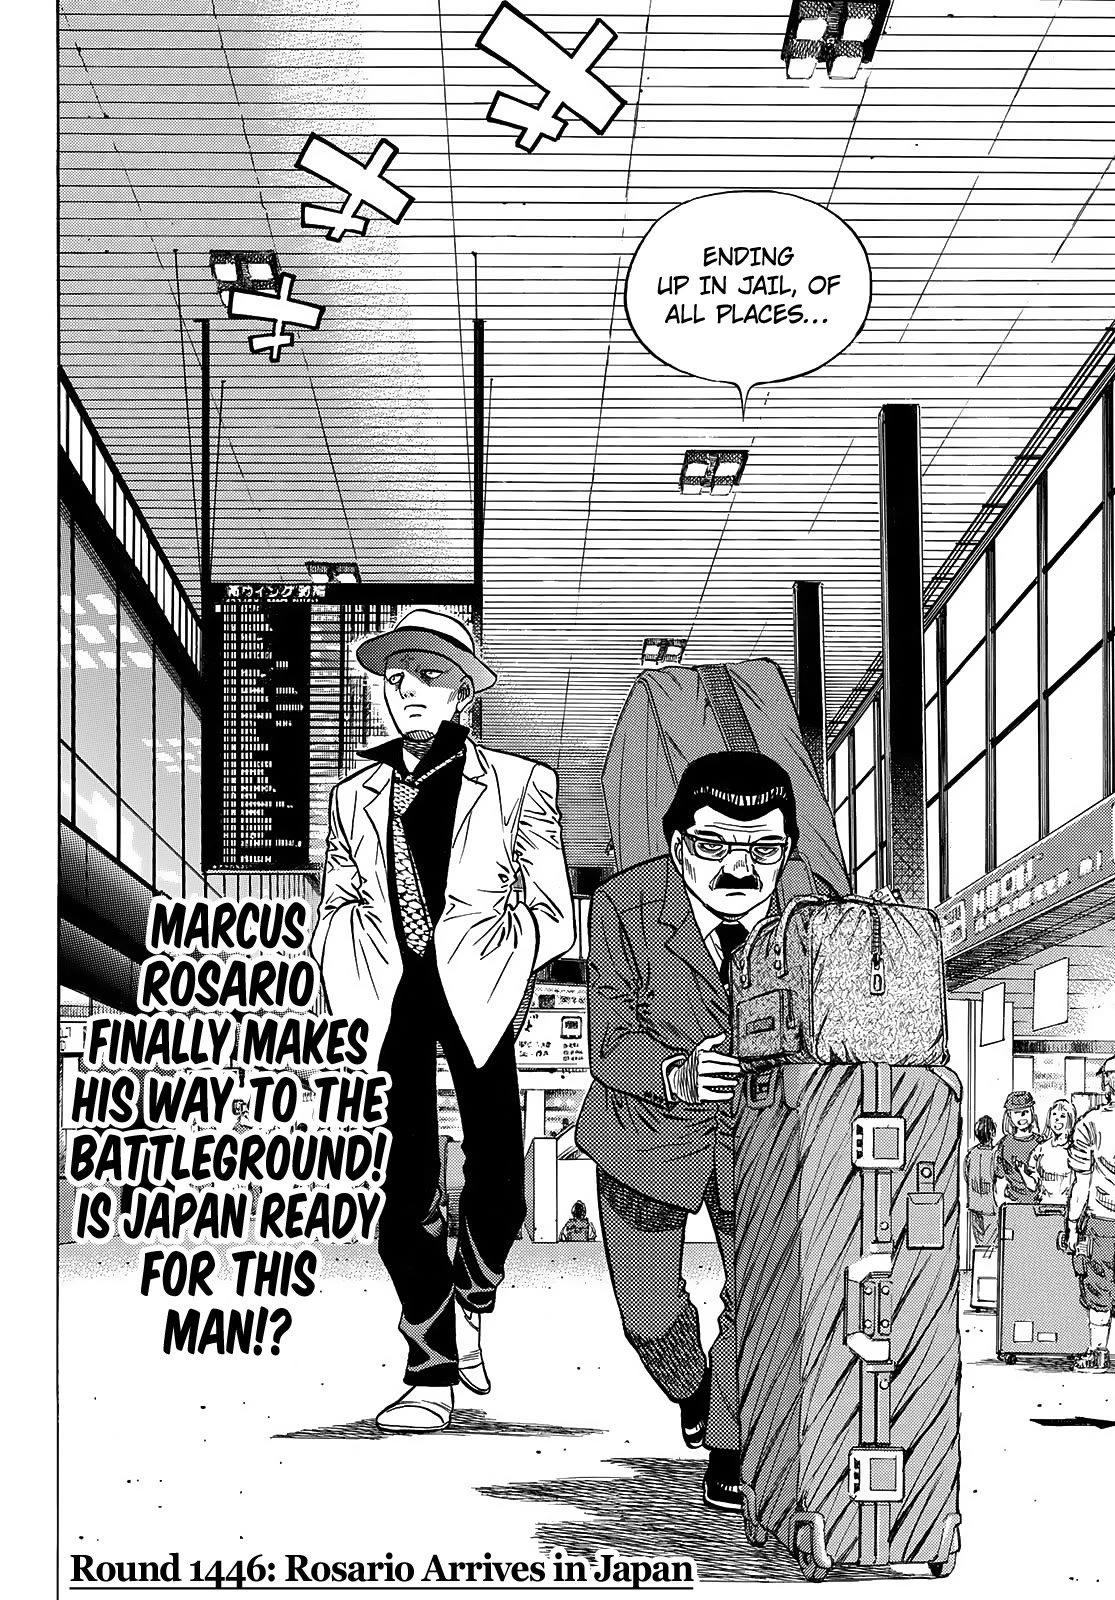 Hajime no Ippo, Chapter 1446 Round 1446 Rosario Arrives in Japan image 03